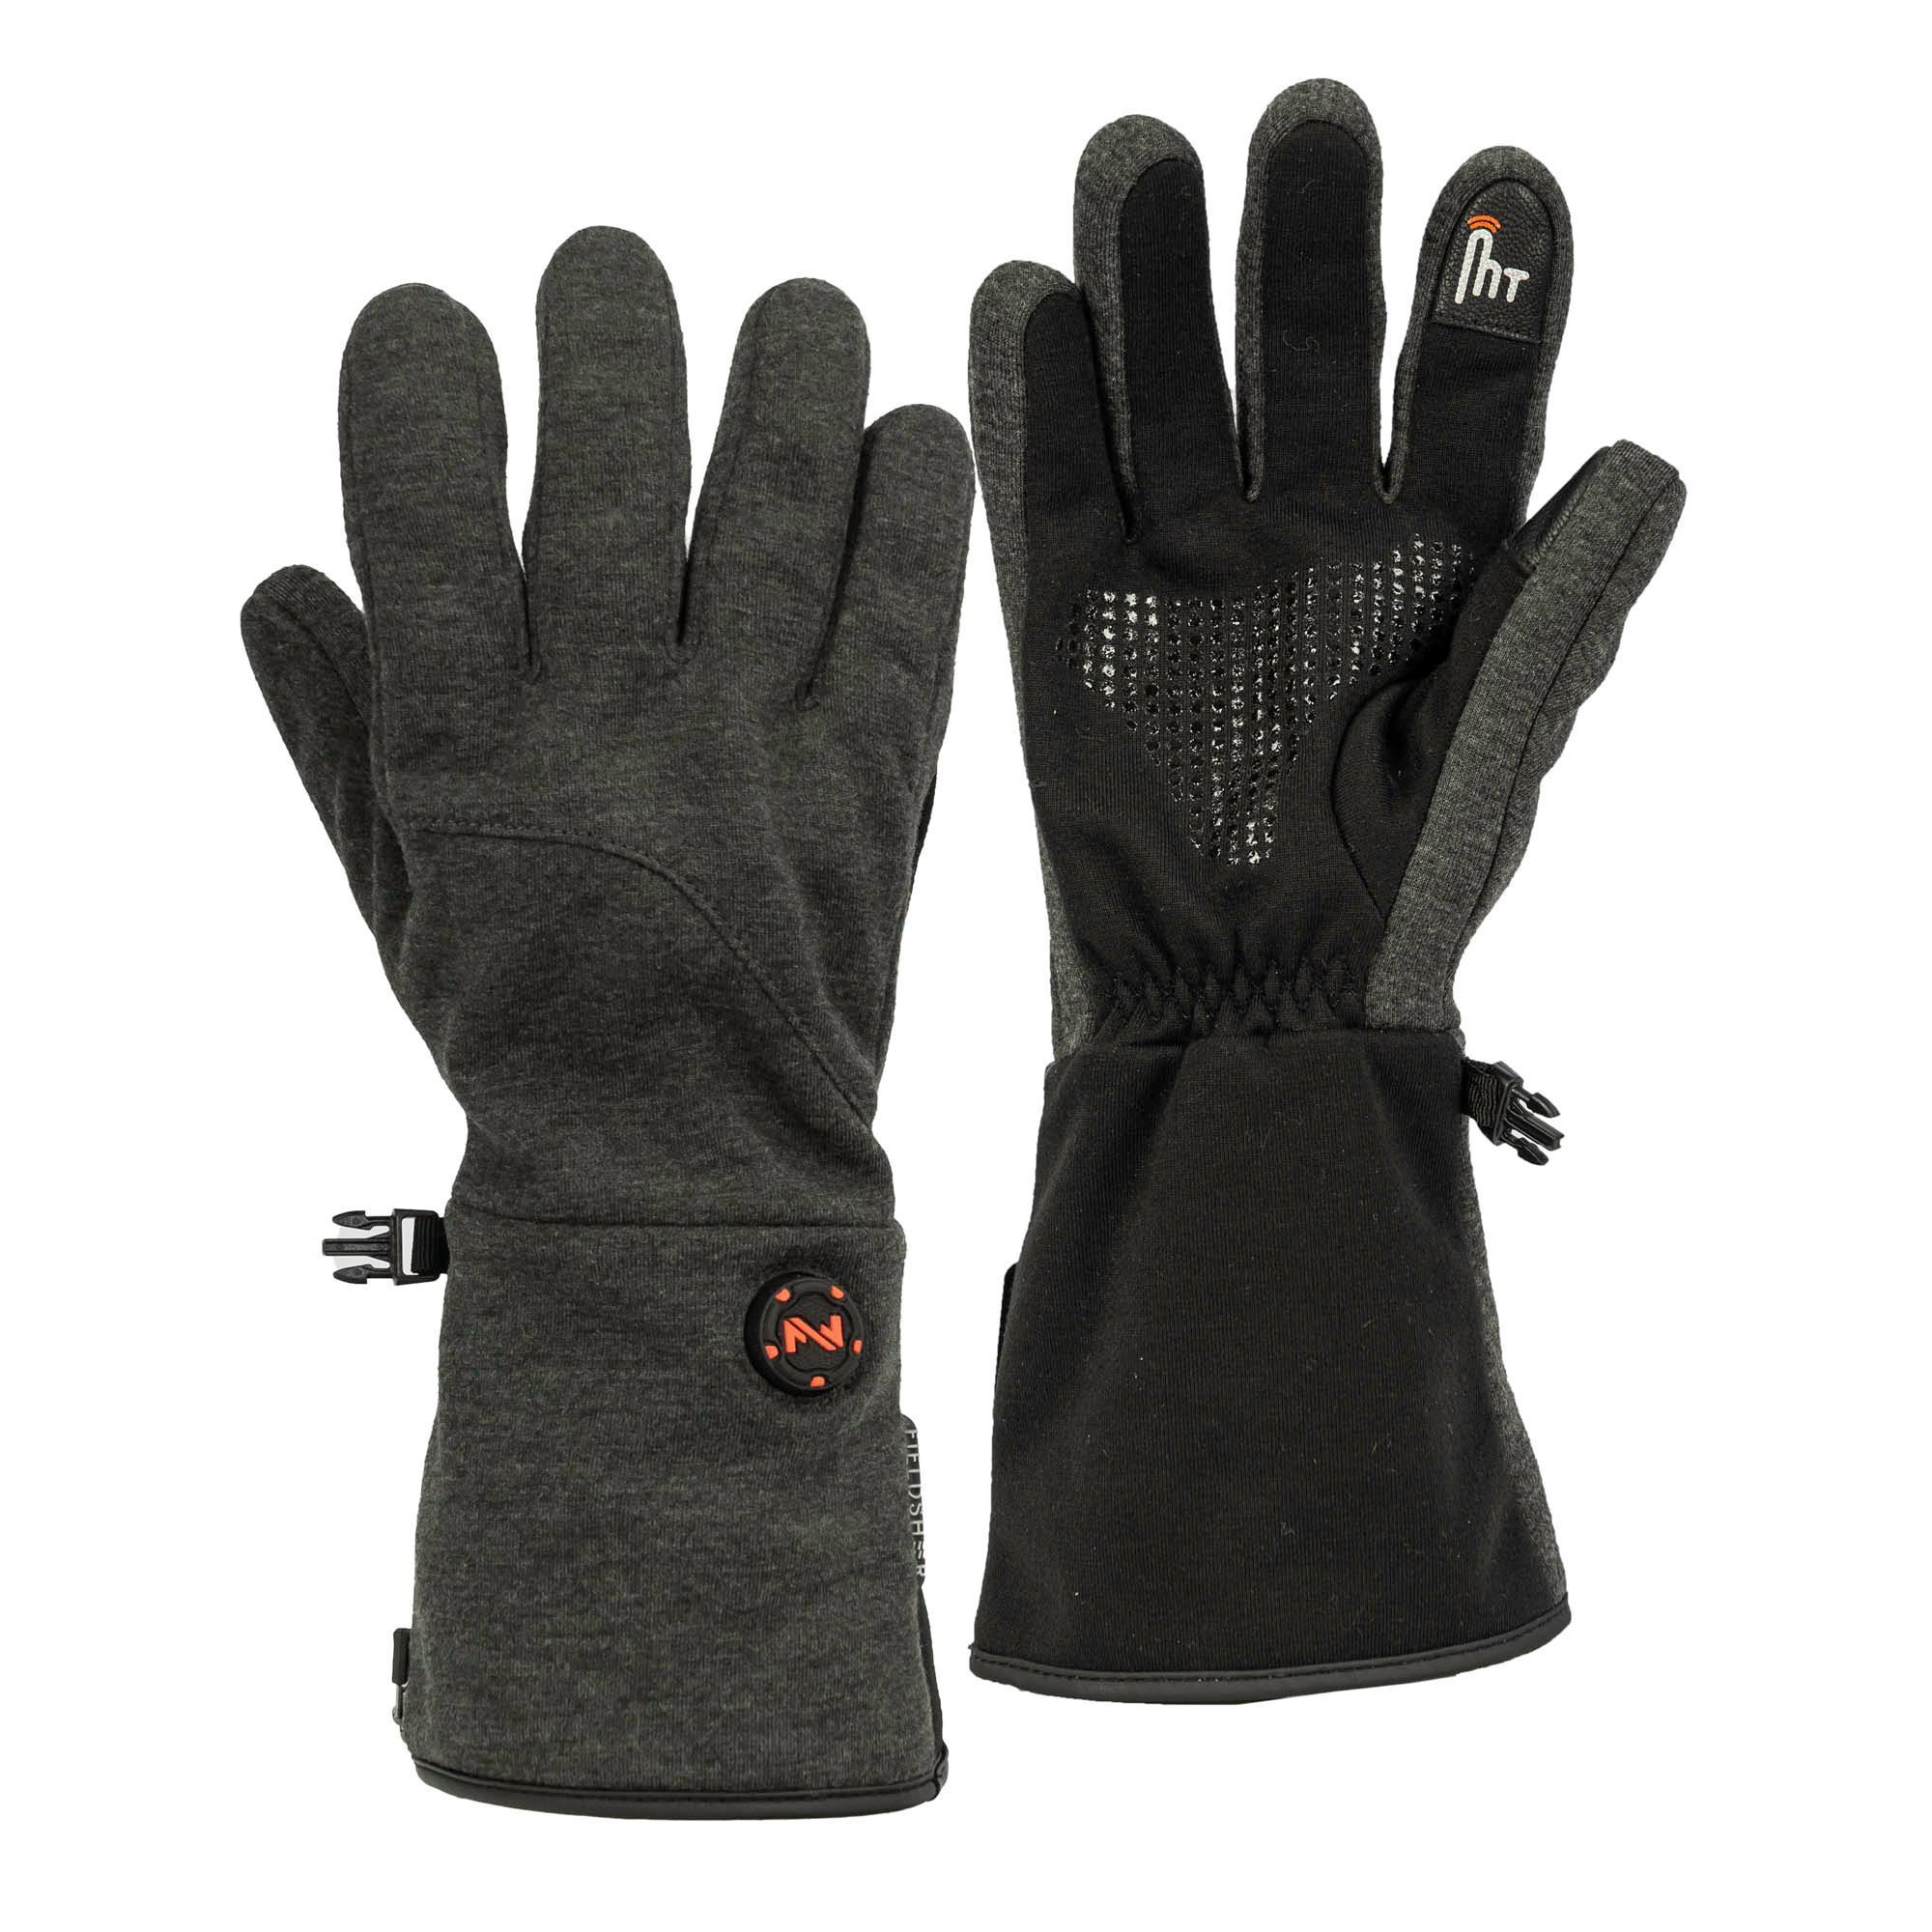 Fieldsheer, Thermal Heated Glove | Unisex | 7.4V | BLK | XS, Size XS, Color Black, Included (qty.) 5 Model MWUG20010121